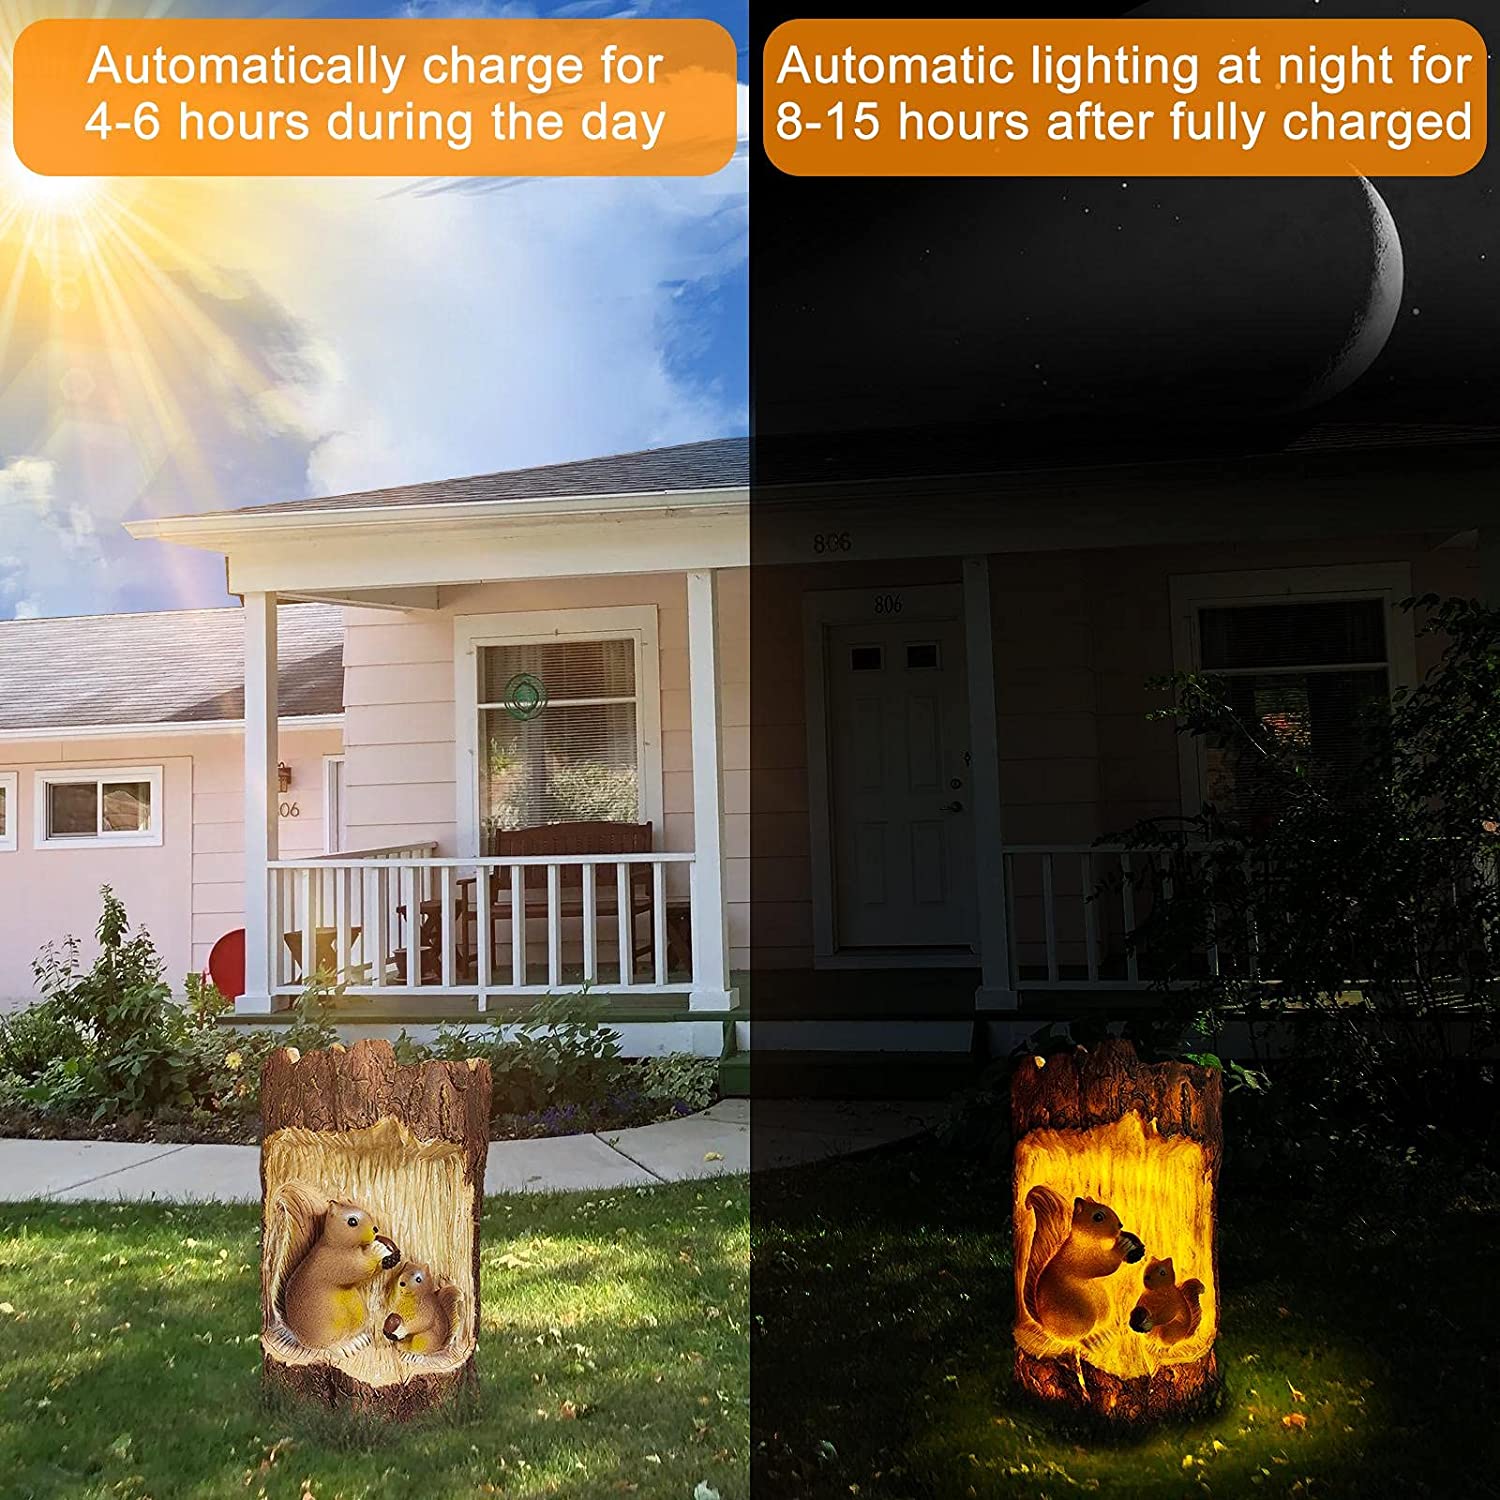 LED-Flood-Street-Lights-Solar-Lights-Squirrel-Outdoor-Garden-Lamp-Outdoor-LED-Waterproof-Solar-Garden-Lights-for-Home-Backyards-Lawn-Patio-Party-Christmas-Holiday-Decorations-10